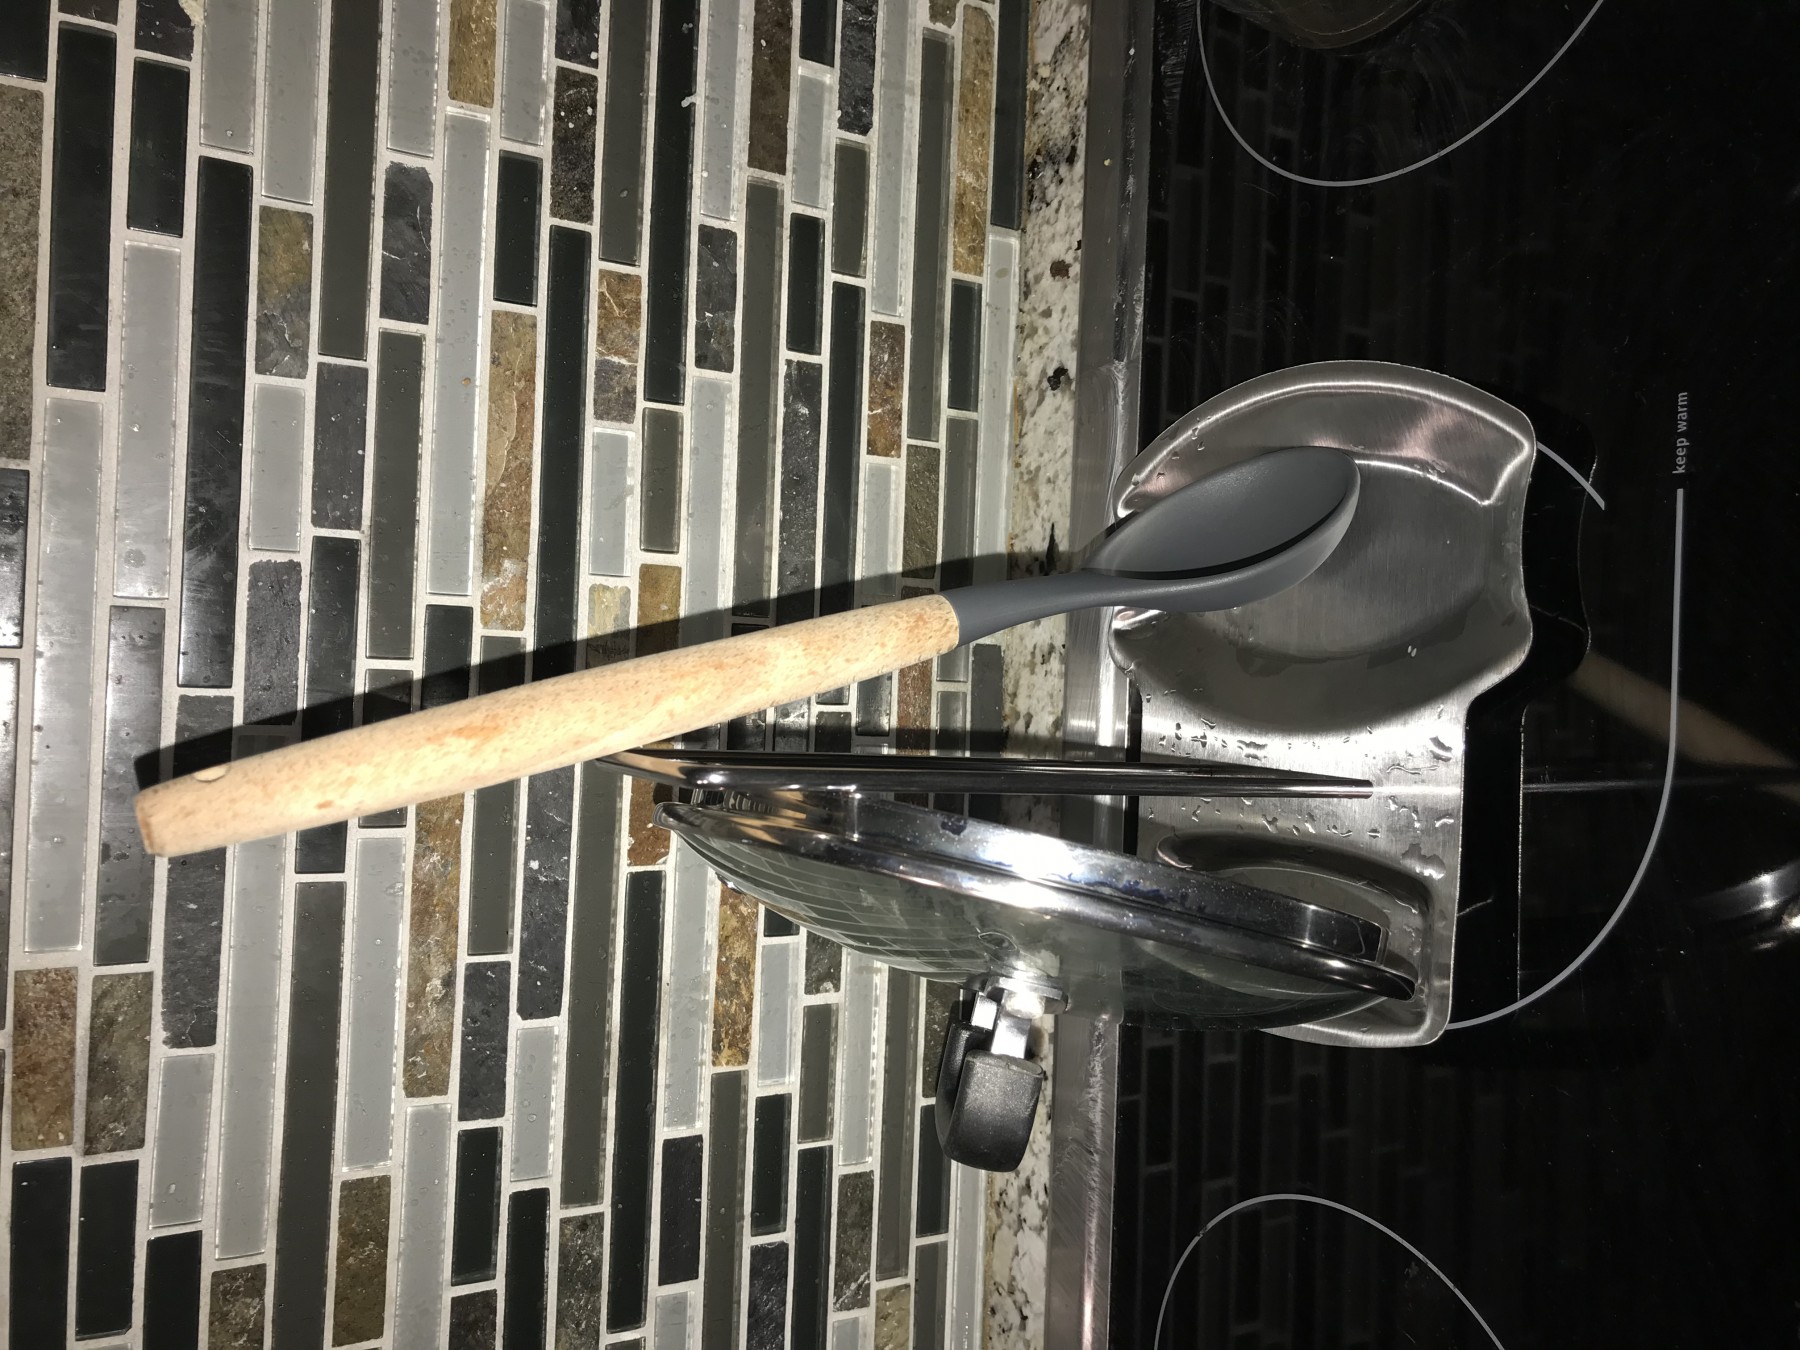 Spoon and lid stand